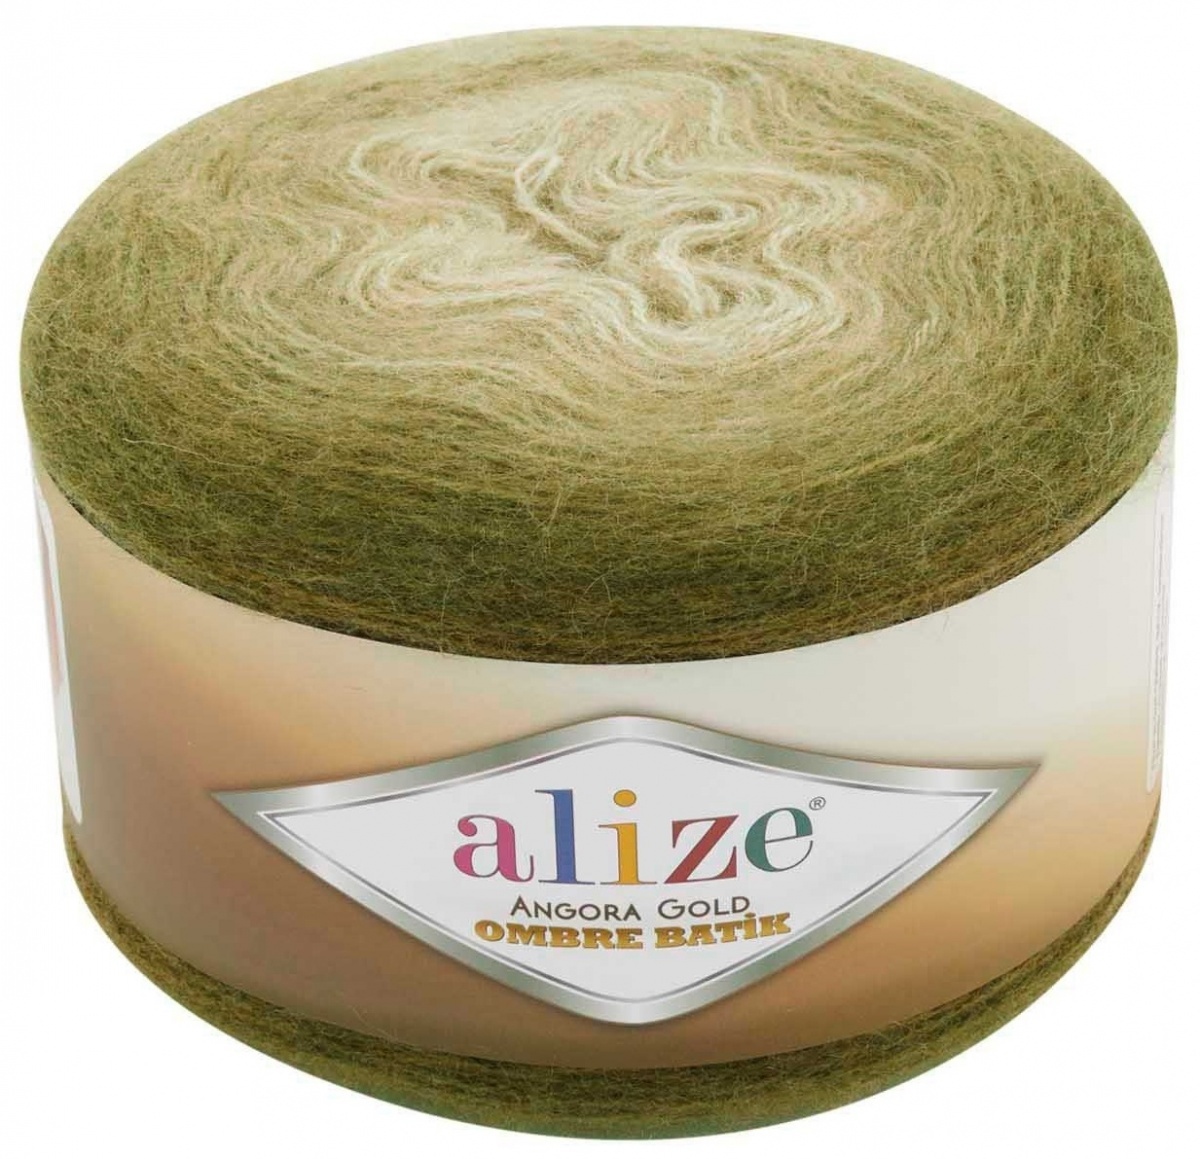 Alize Angora Gold Ombre Batik, 20% Wool, 80% Acrylic 4 Skein Value Pack, 600g фото 14